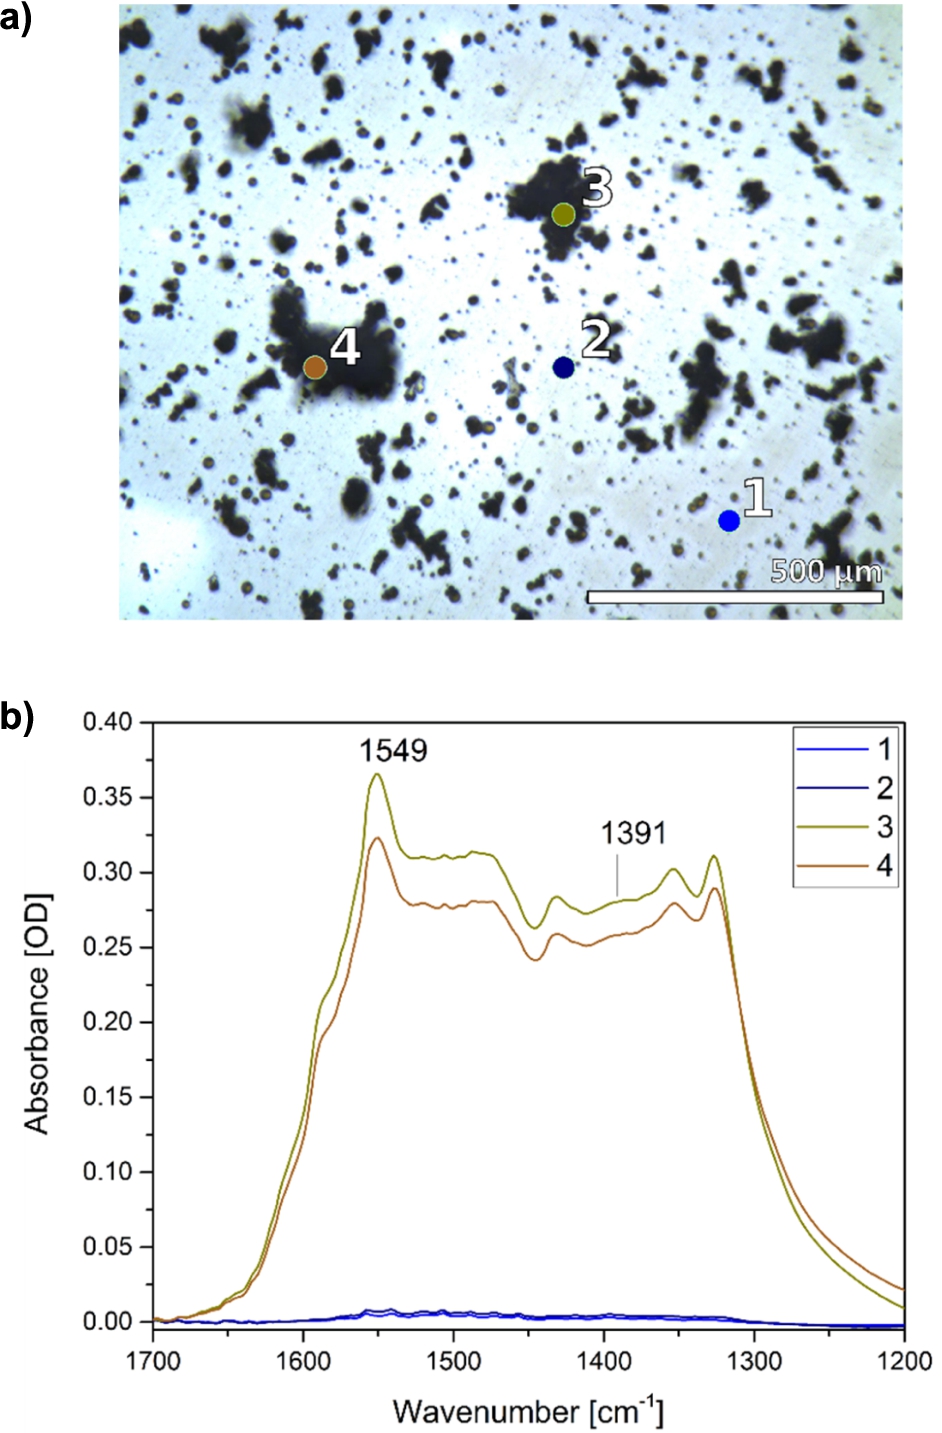 Chemical imaging of the ZnO thin film with FTIR microscopy. a) Visible light image of a ZnO thin film and selected areas (1–4). b) Corresponding infrared spectra reveal the heterogeneity of the ZnO film with low particle density (1, 2) and areas containing particle-aggregates (3, 4).